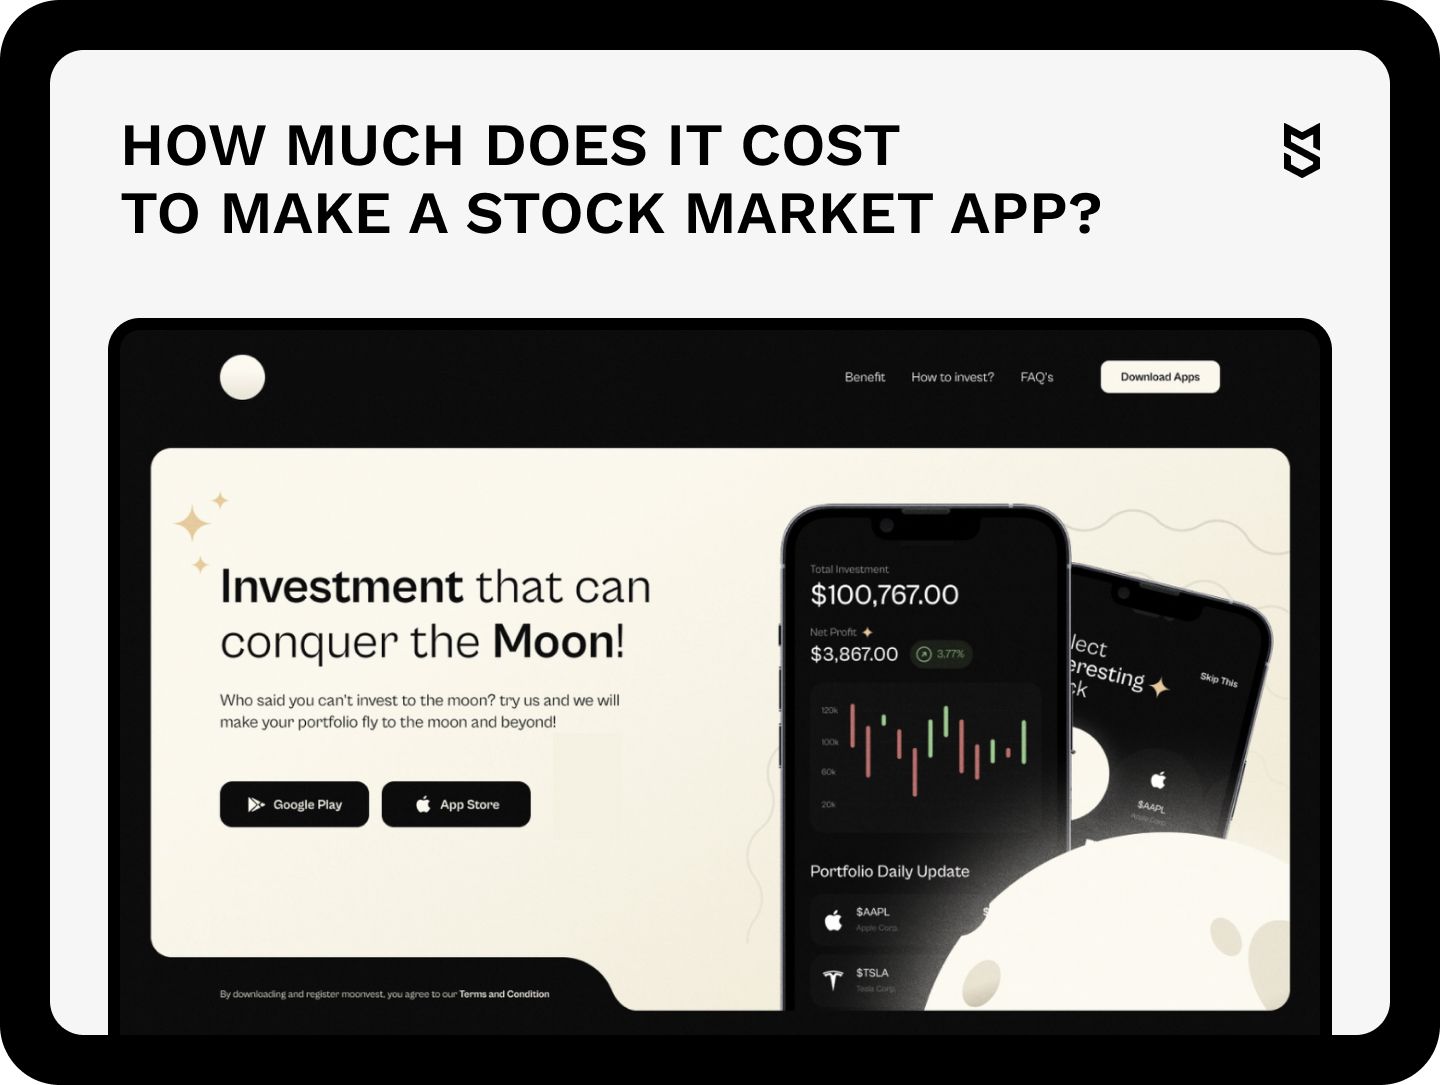 How much does it cost to make a stock market app?